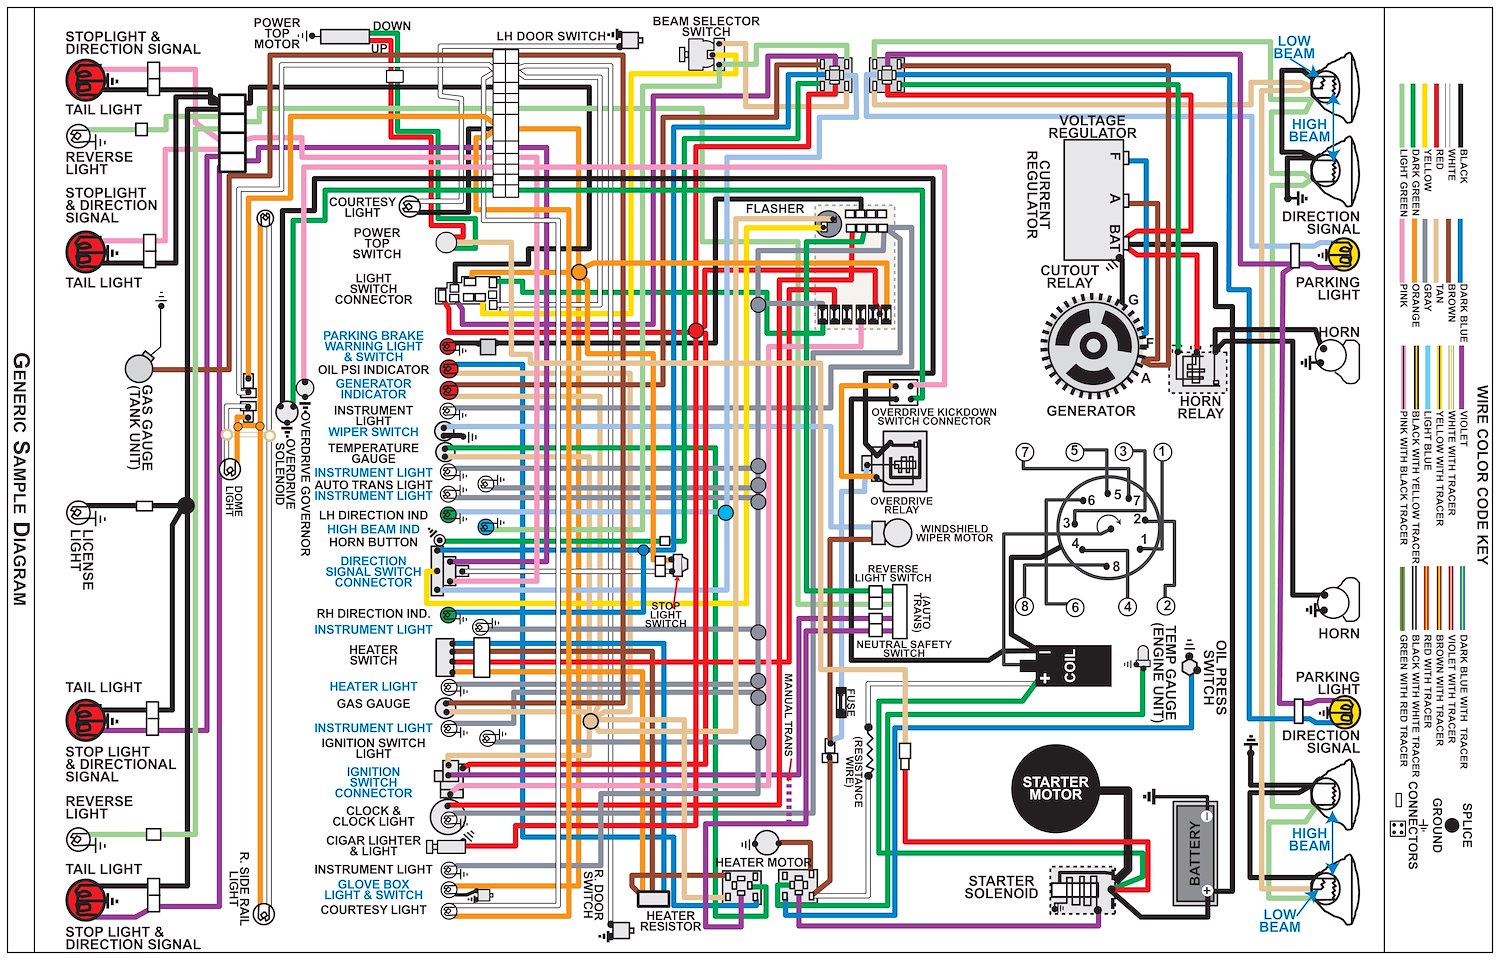 Wiring Diagram for 1956 Ford Car, 11 in x 17 in., Laminated